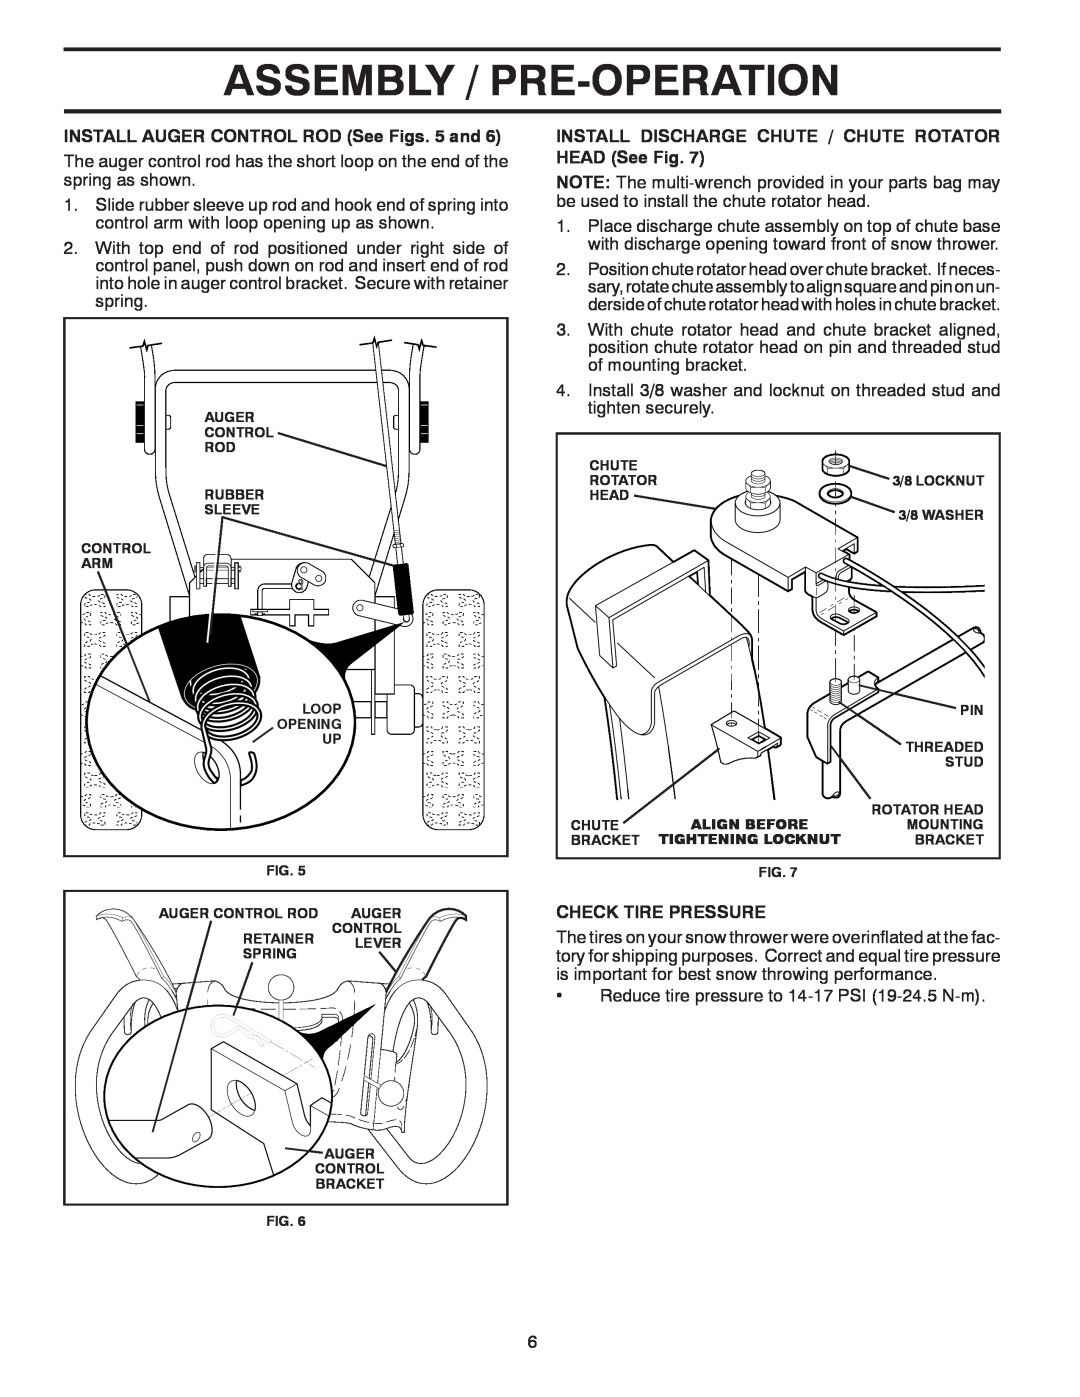 Poulan 419002 owner manual Assembly / Pre-Operation, INSTALL AUGER CONTROL ROD See Figs. 5 and, Check Tire Pressure 